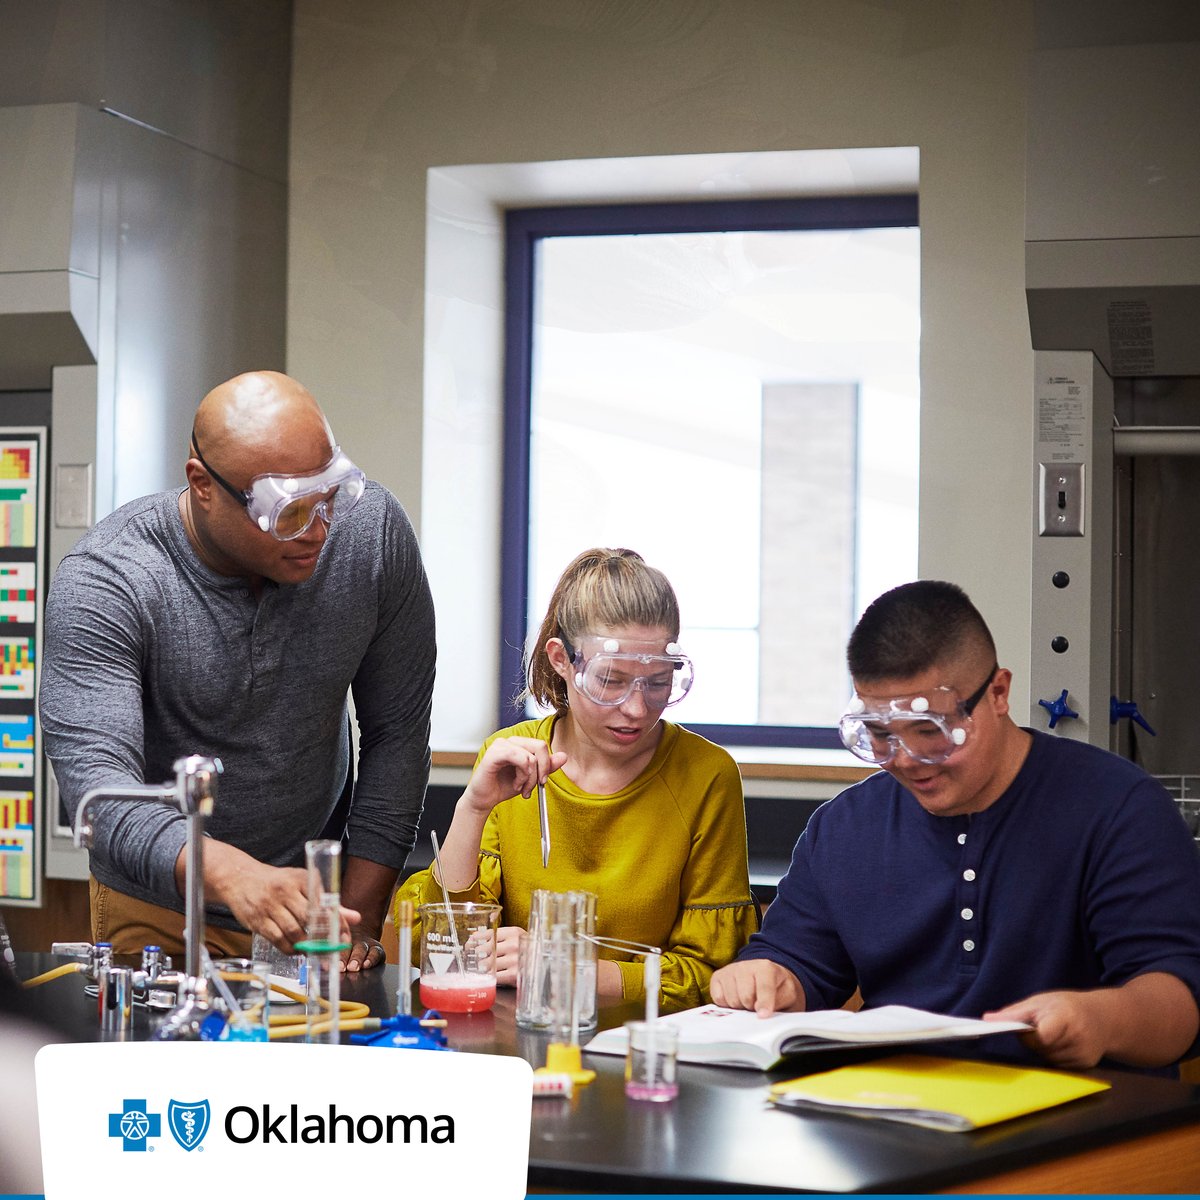 Science teachers. Construction workers. Product manufacturers. If you work in a dynamic environment where office supplies tend to fly, make sure you’re wearing eye protection! spr.ly/6014ktqZq #WorkplaceEyeSafetyMonth